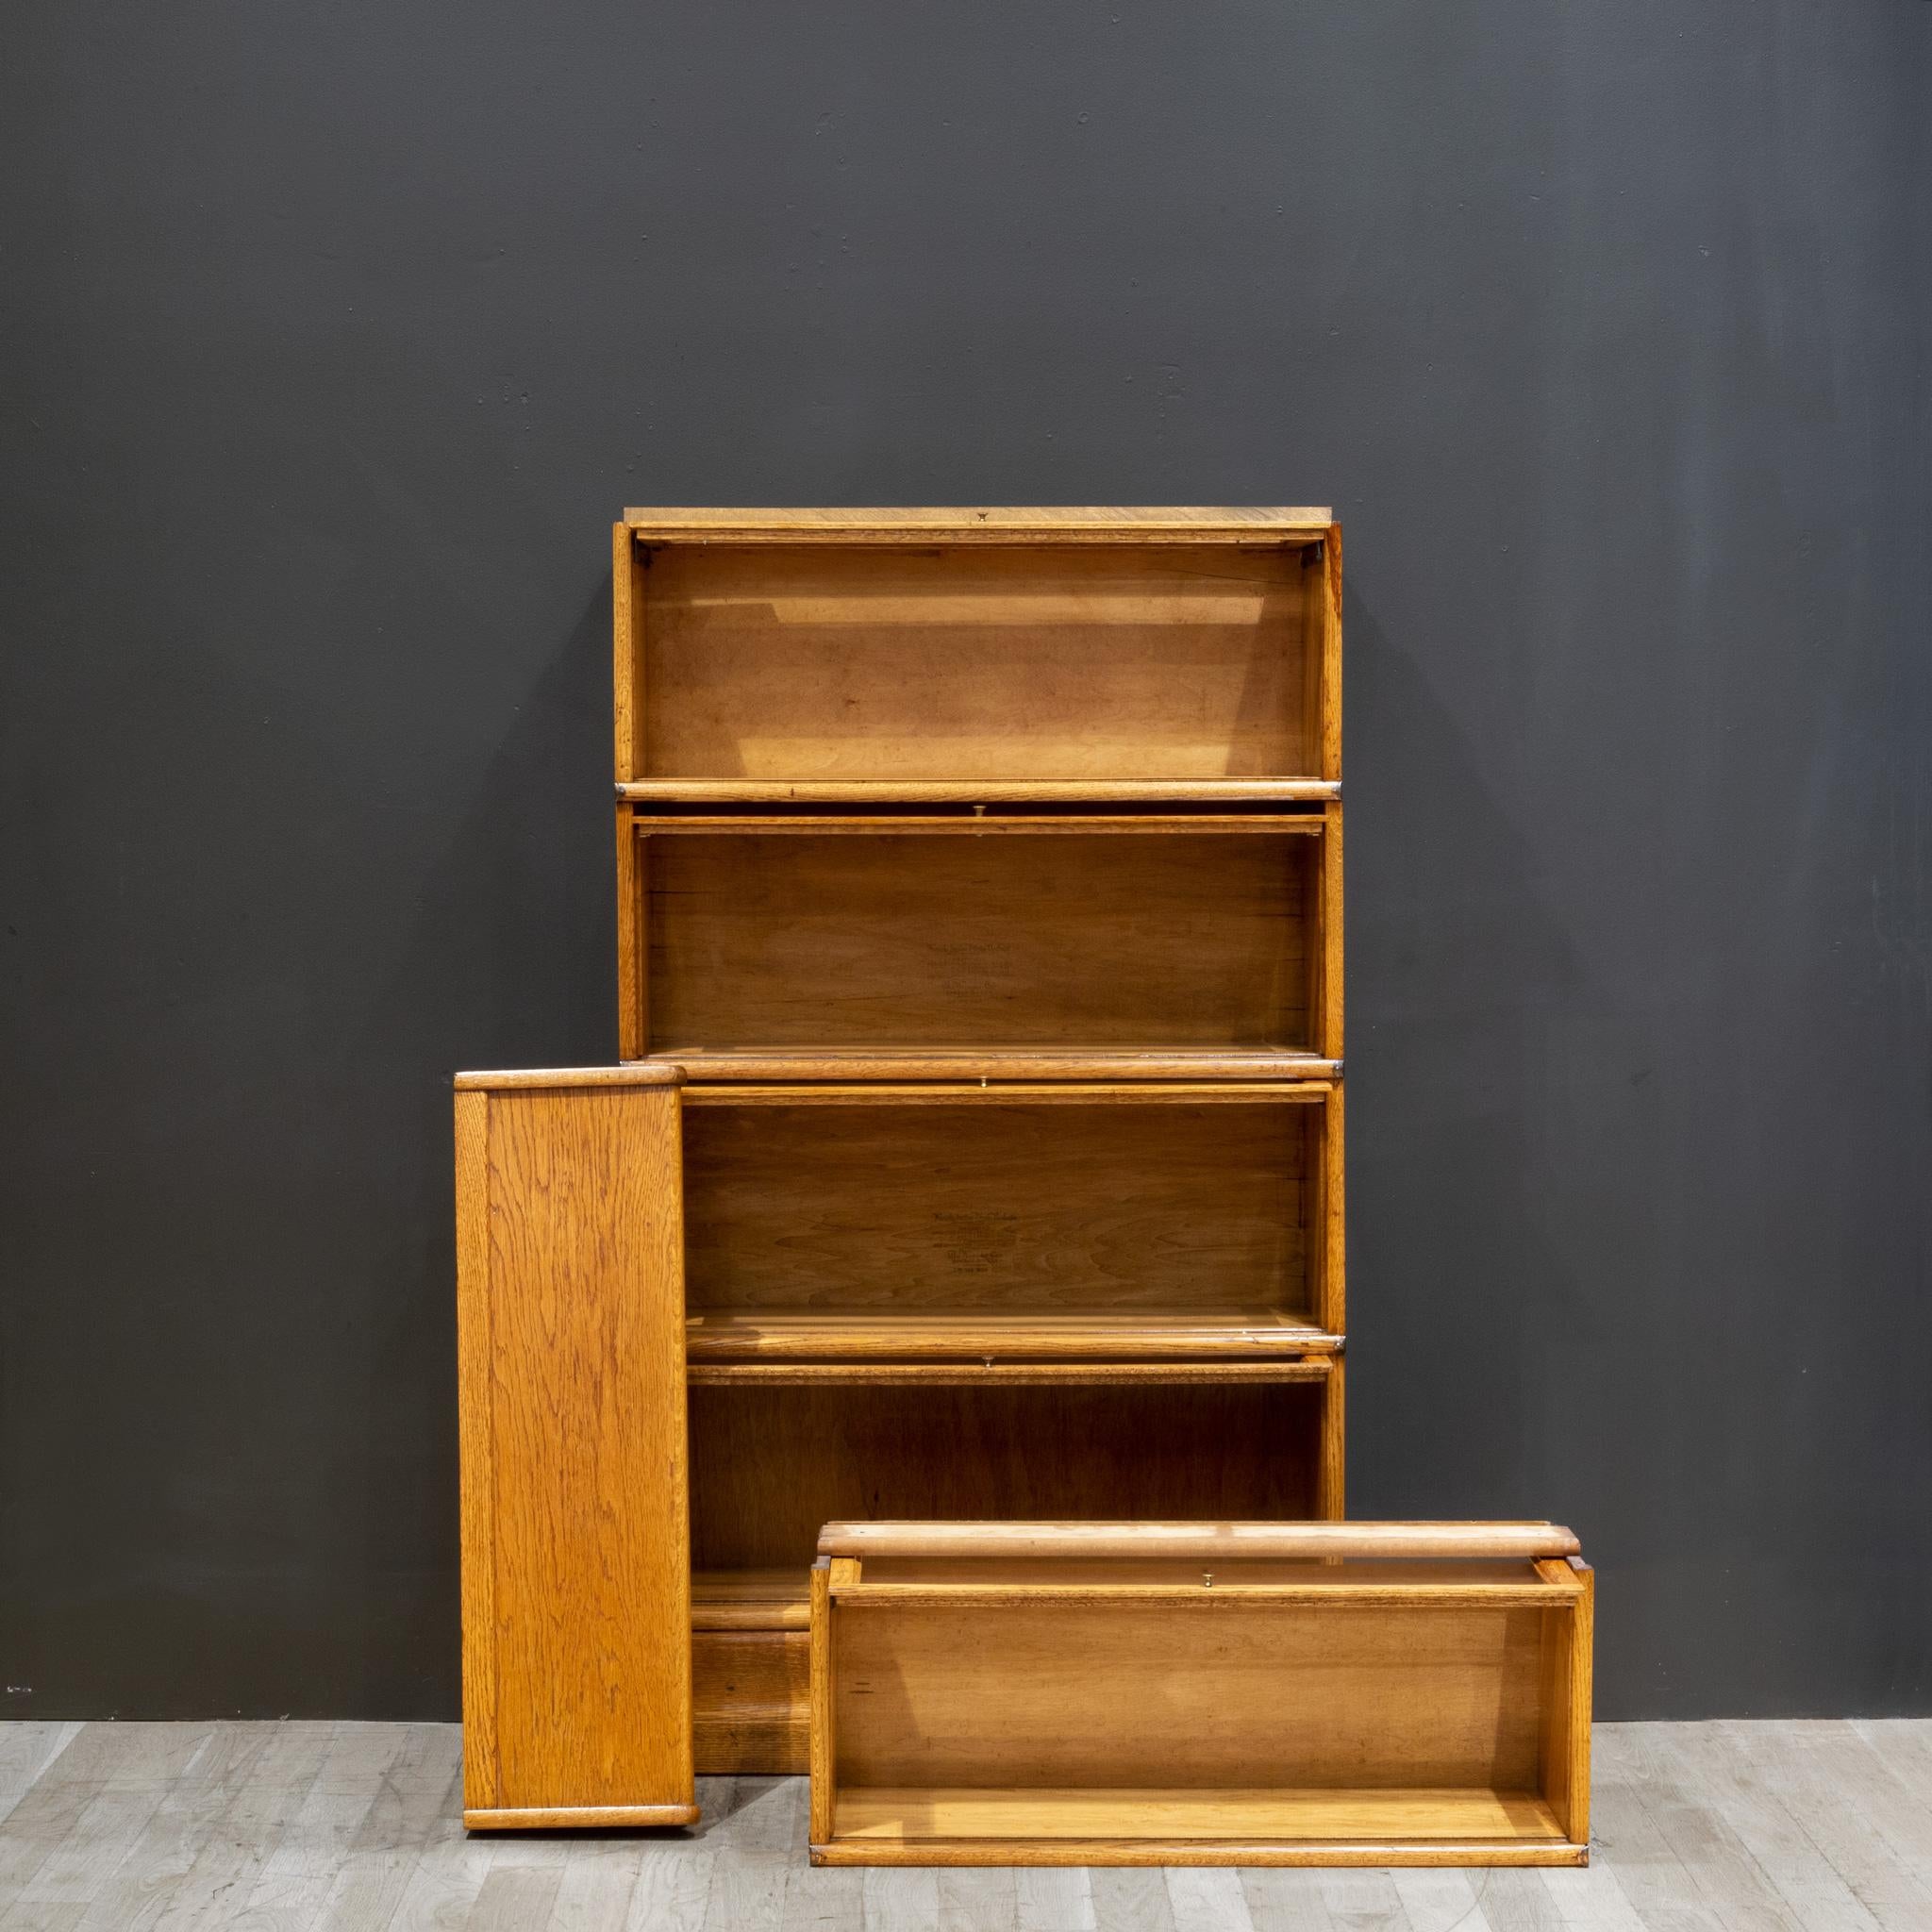 Late Victorian Early 20th c. Globe-Wernicke 5 Stack Lawyer's Bookcase c.1900-1910 For Sale